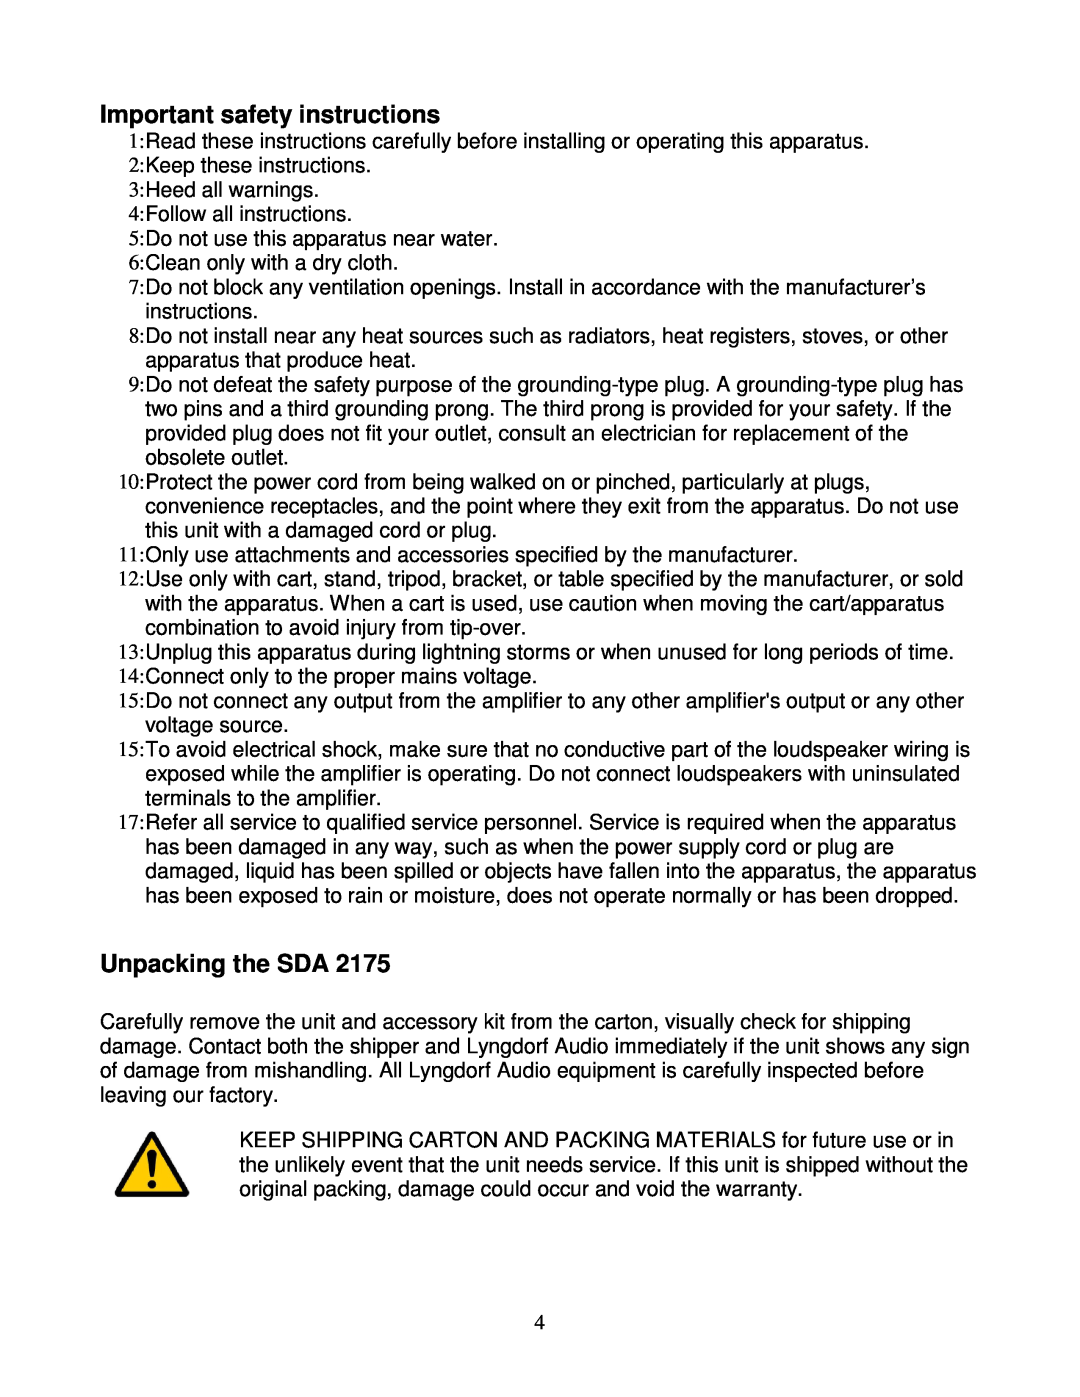 Lyngdorf Audio SDA 2175 owner manual Important safety instructions, Unpacking the SDA 